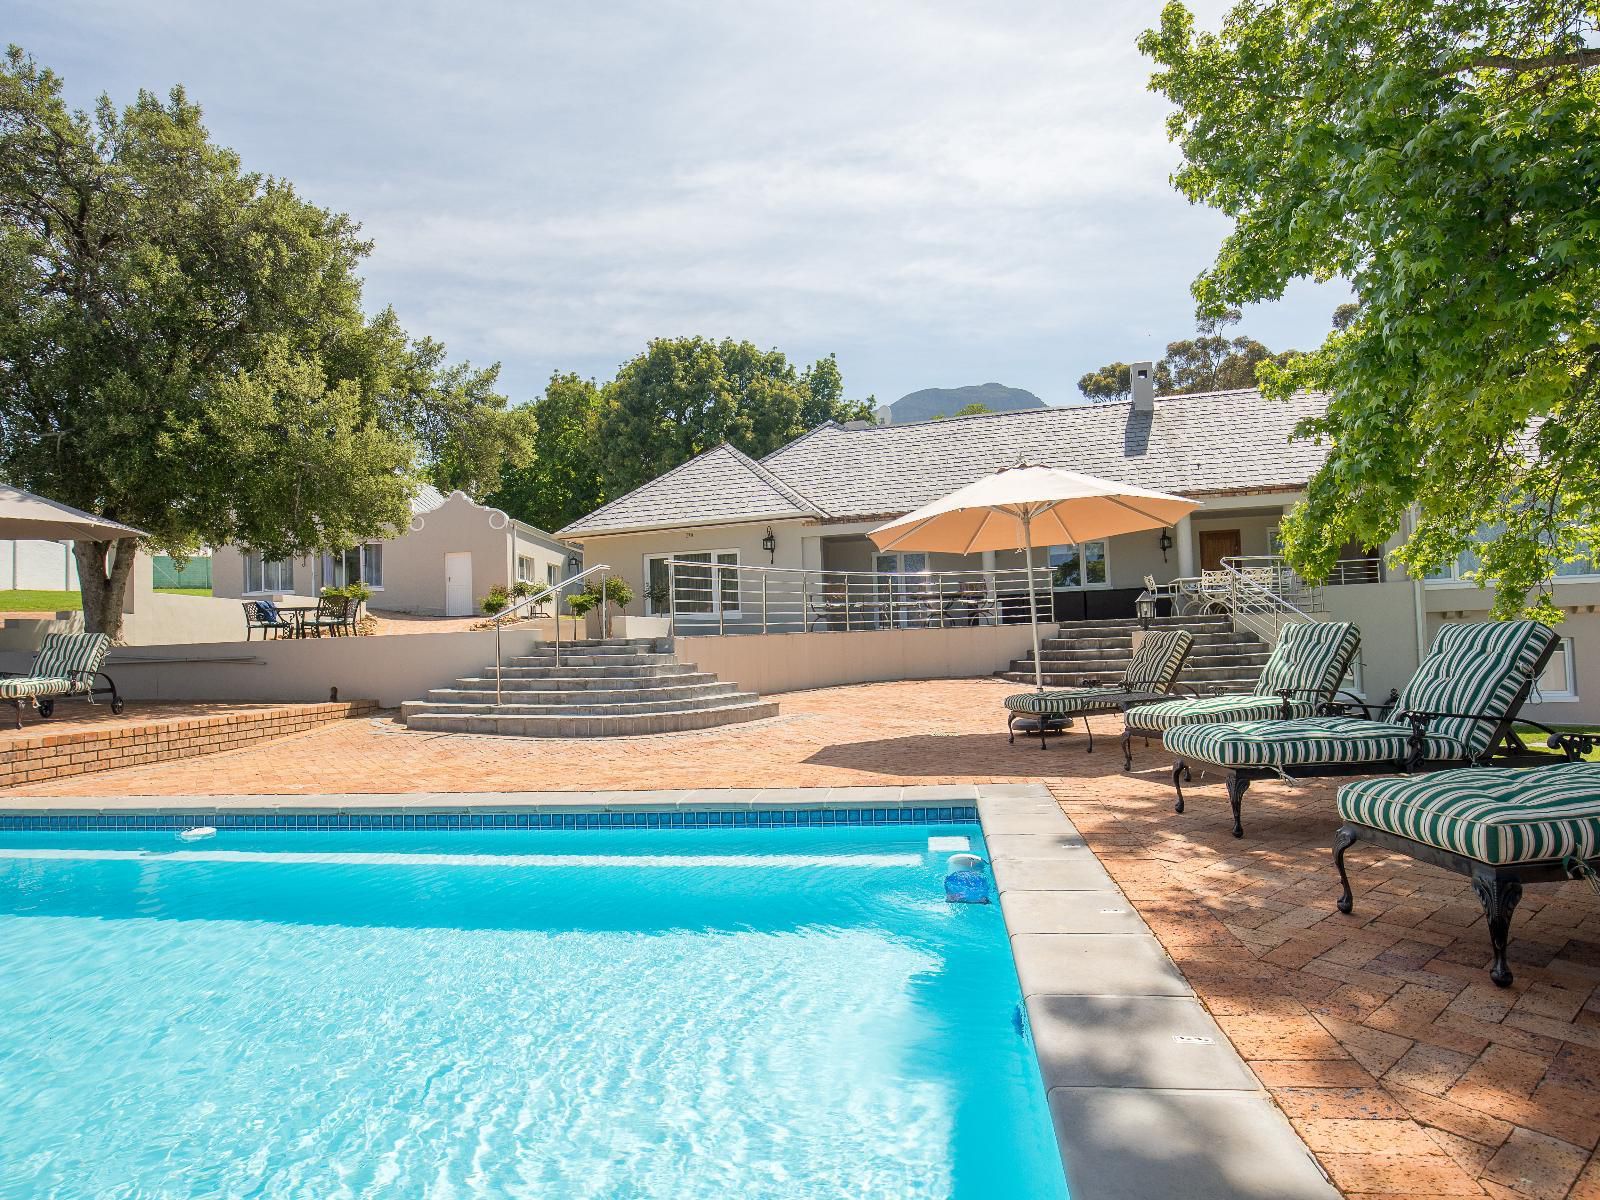 La Felicita Boutique Villas And Apartments Parel Vallei Somerset West Western Cape South Africa Complementary Colors, House, Building, Architecture, Swimming Pool